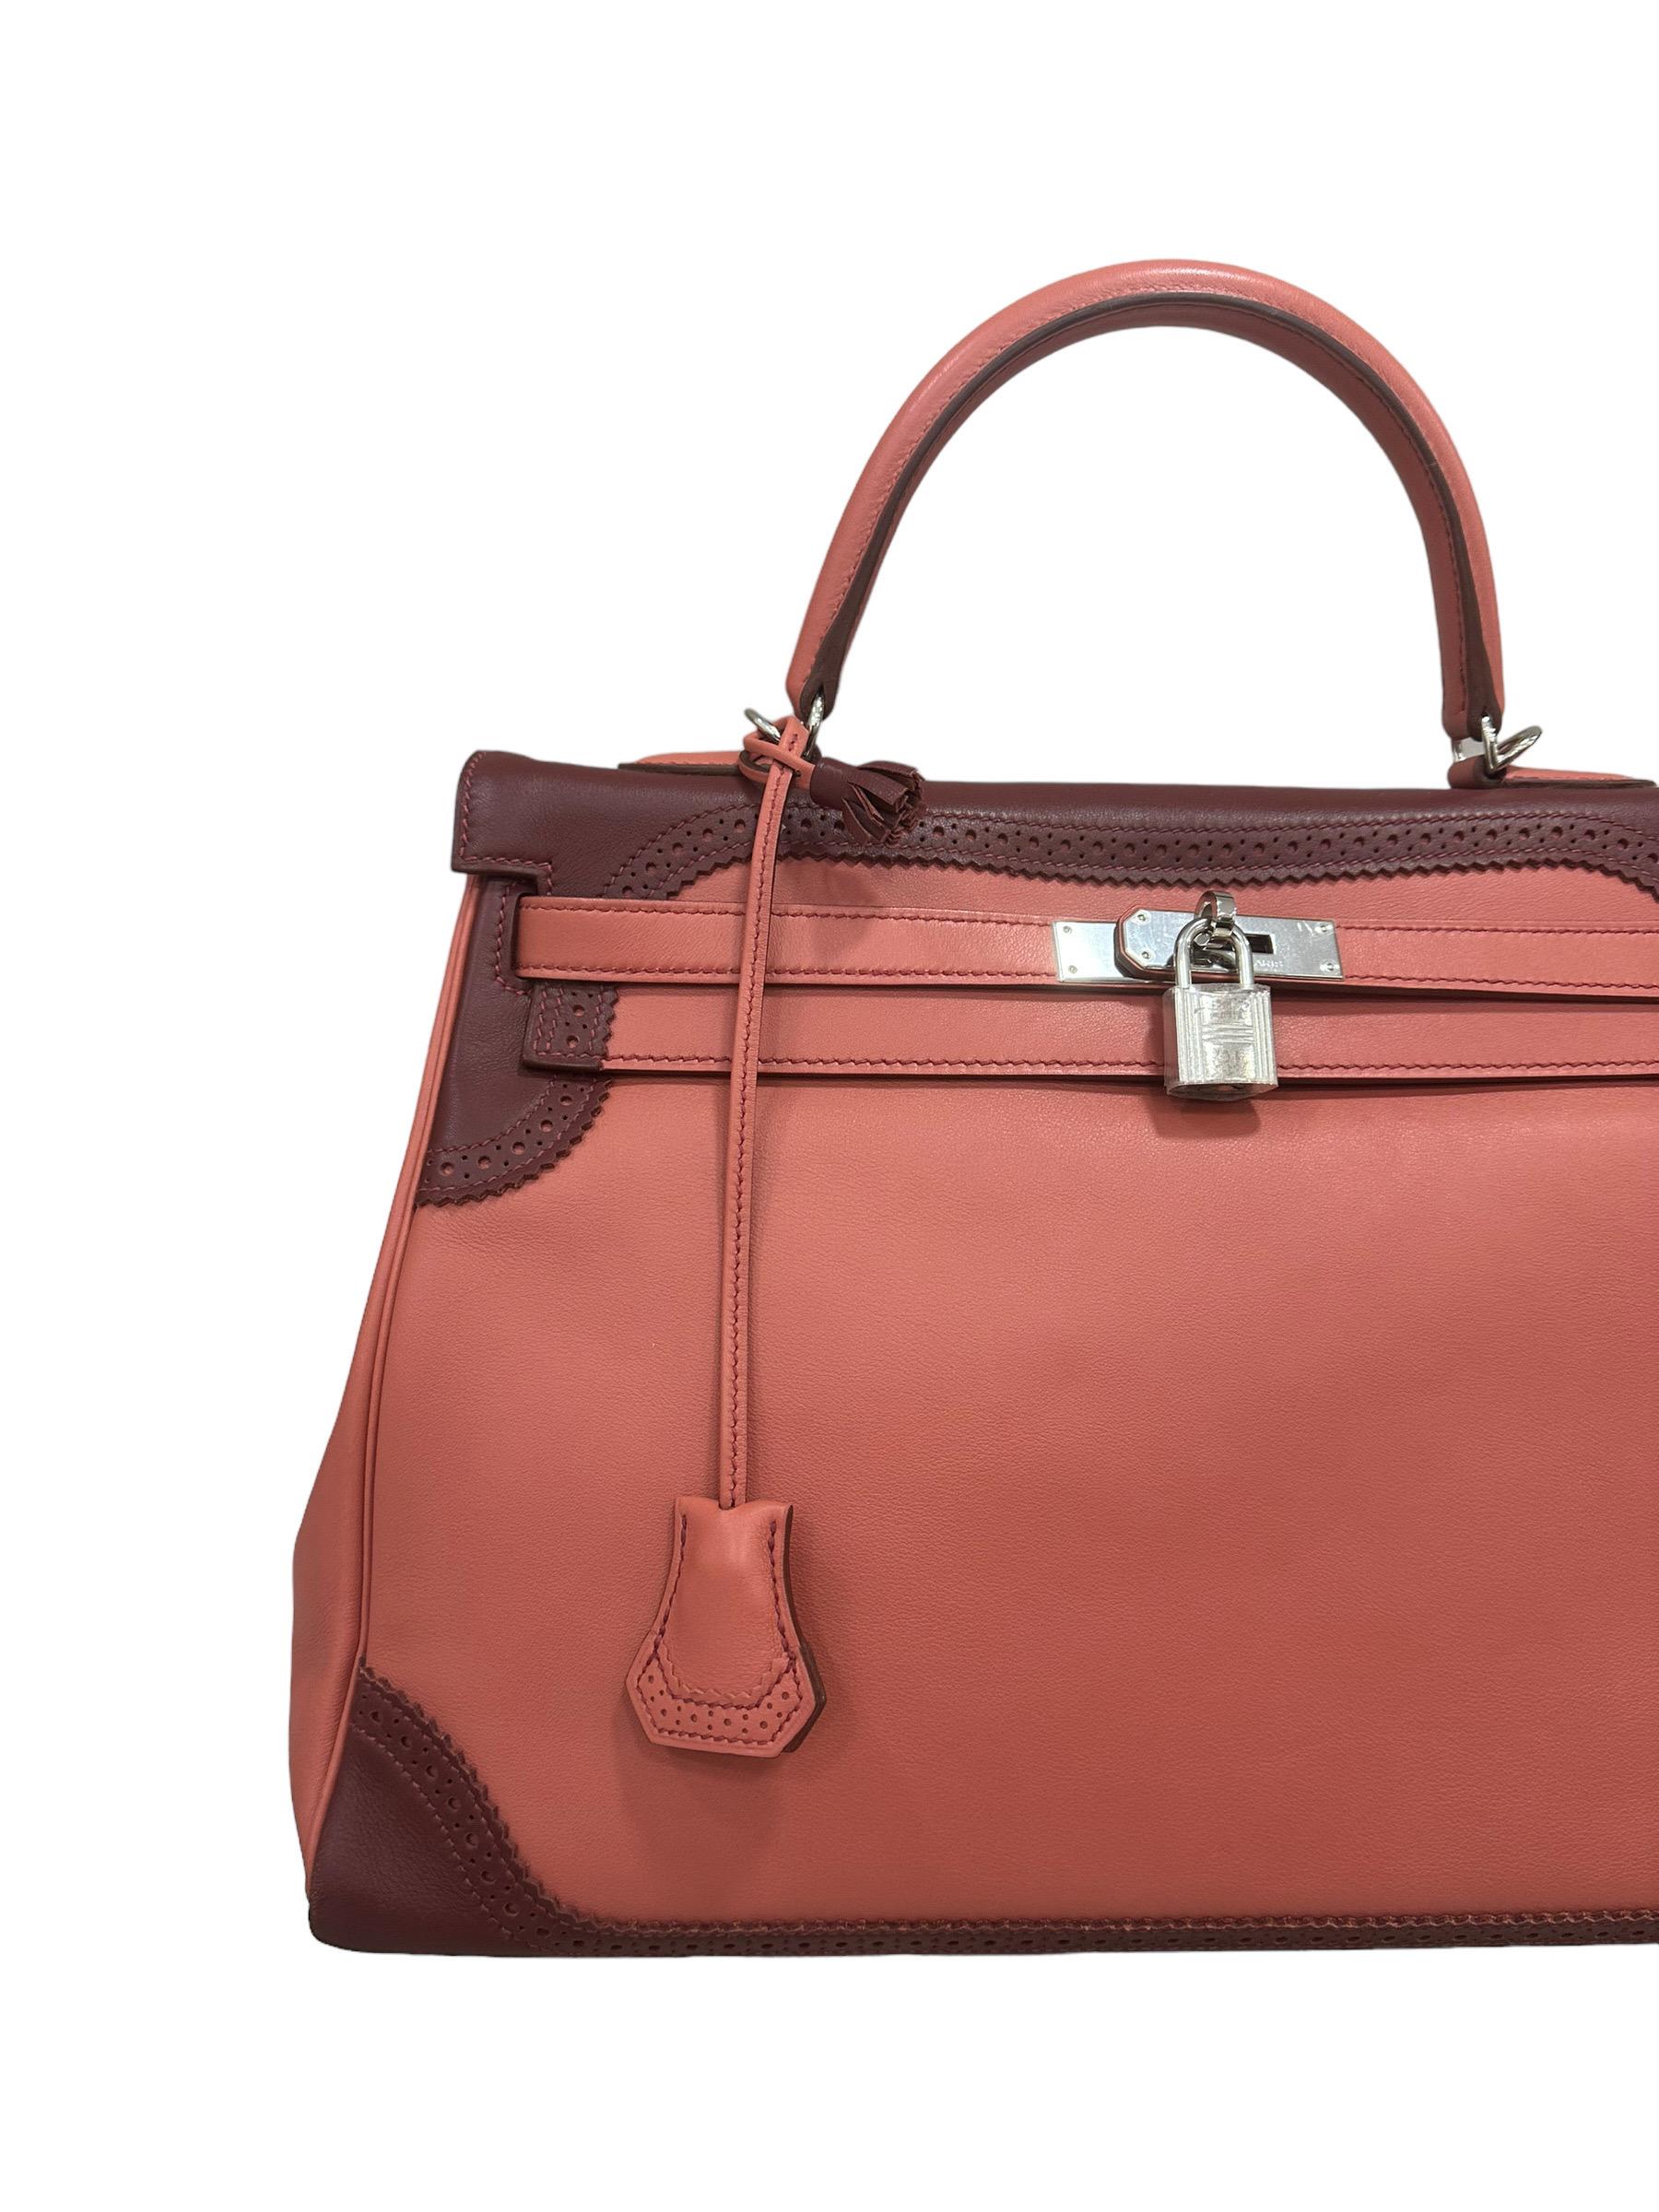 2012 Hermès Kelly 35 Ghillies Evercalf Rose Texas/Rouge H For Sale 6